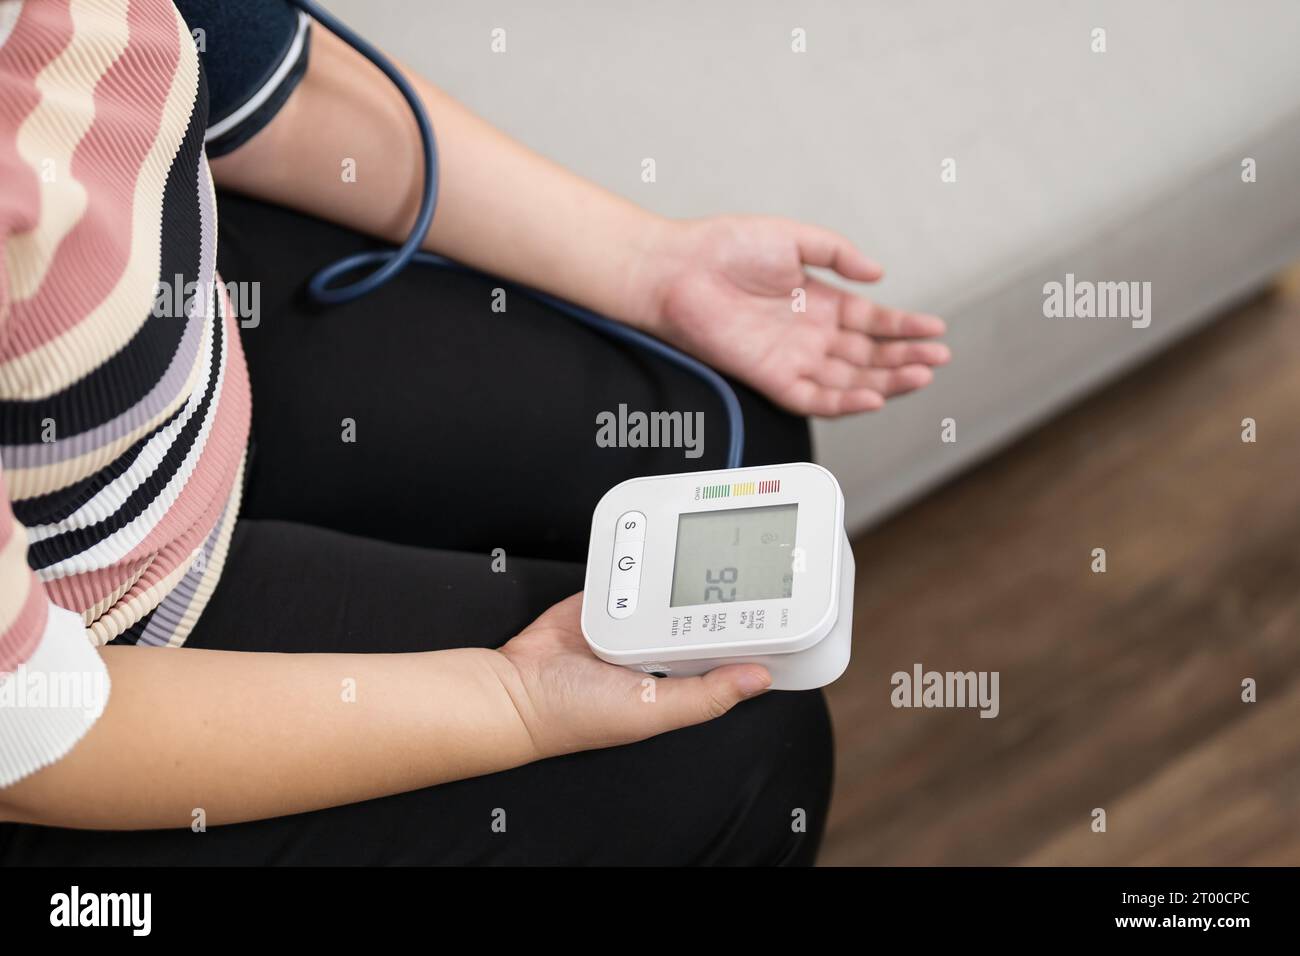 https://c8.alamy.com/comp/2T00CPC/woman-overweight-plus-size-self-checks-measuring-blood-pressure-and-heart-rate-tonometer-self-checkup-at-home-2T00CPC.jpg